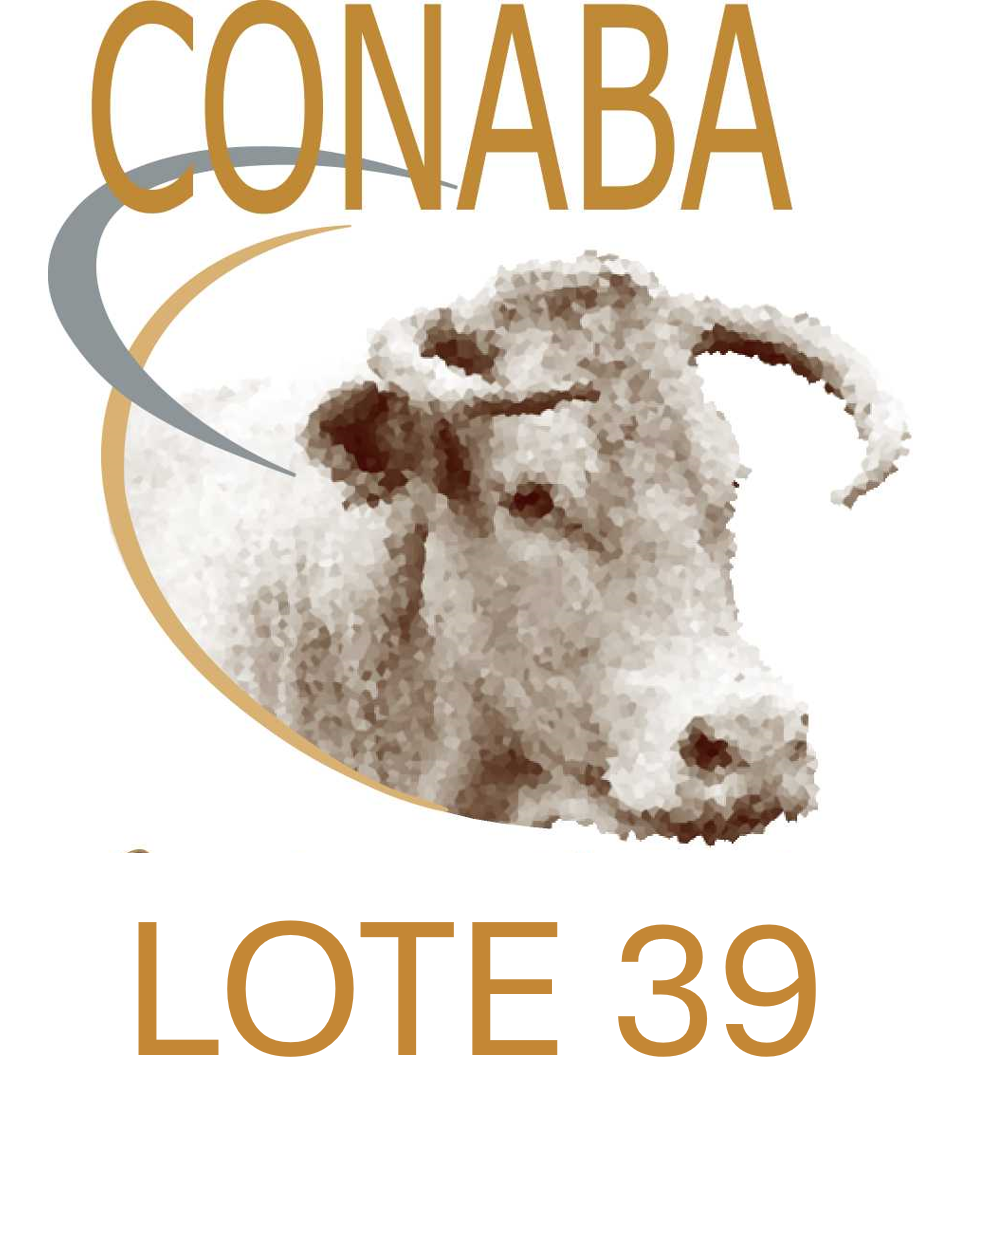 LOTE 39